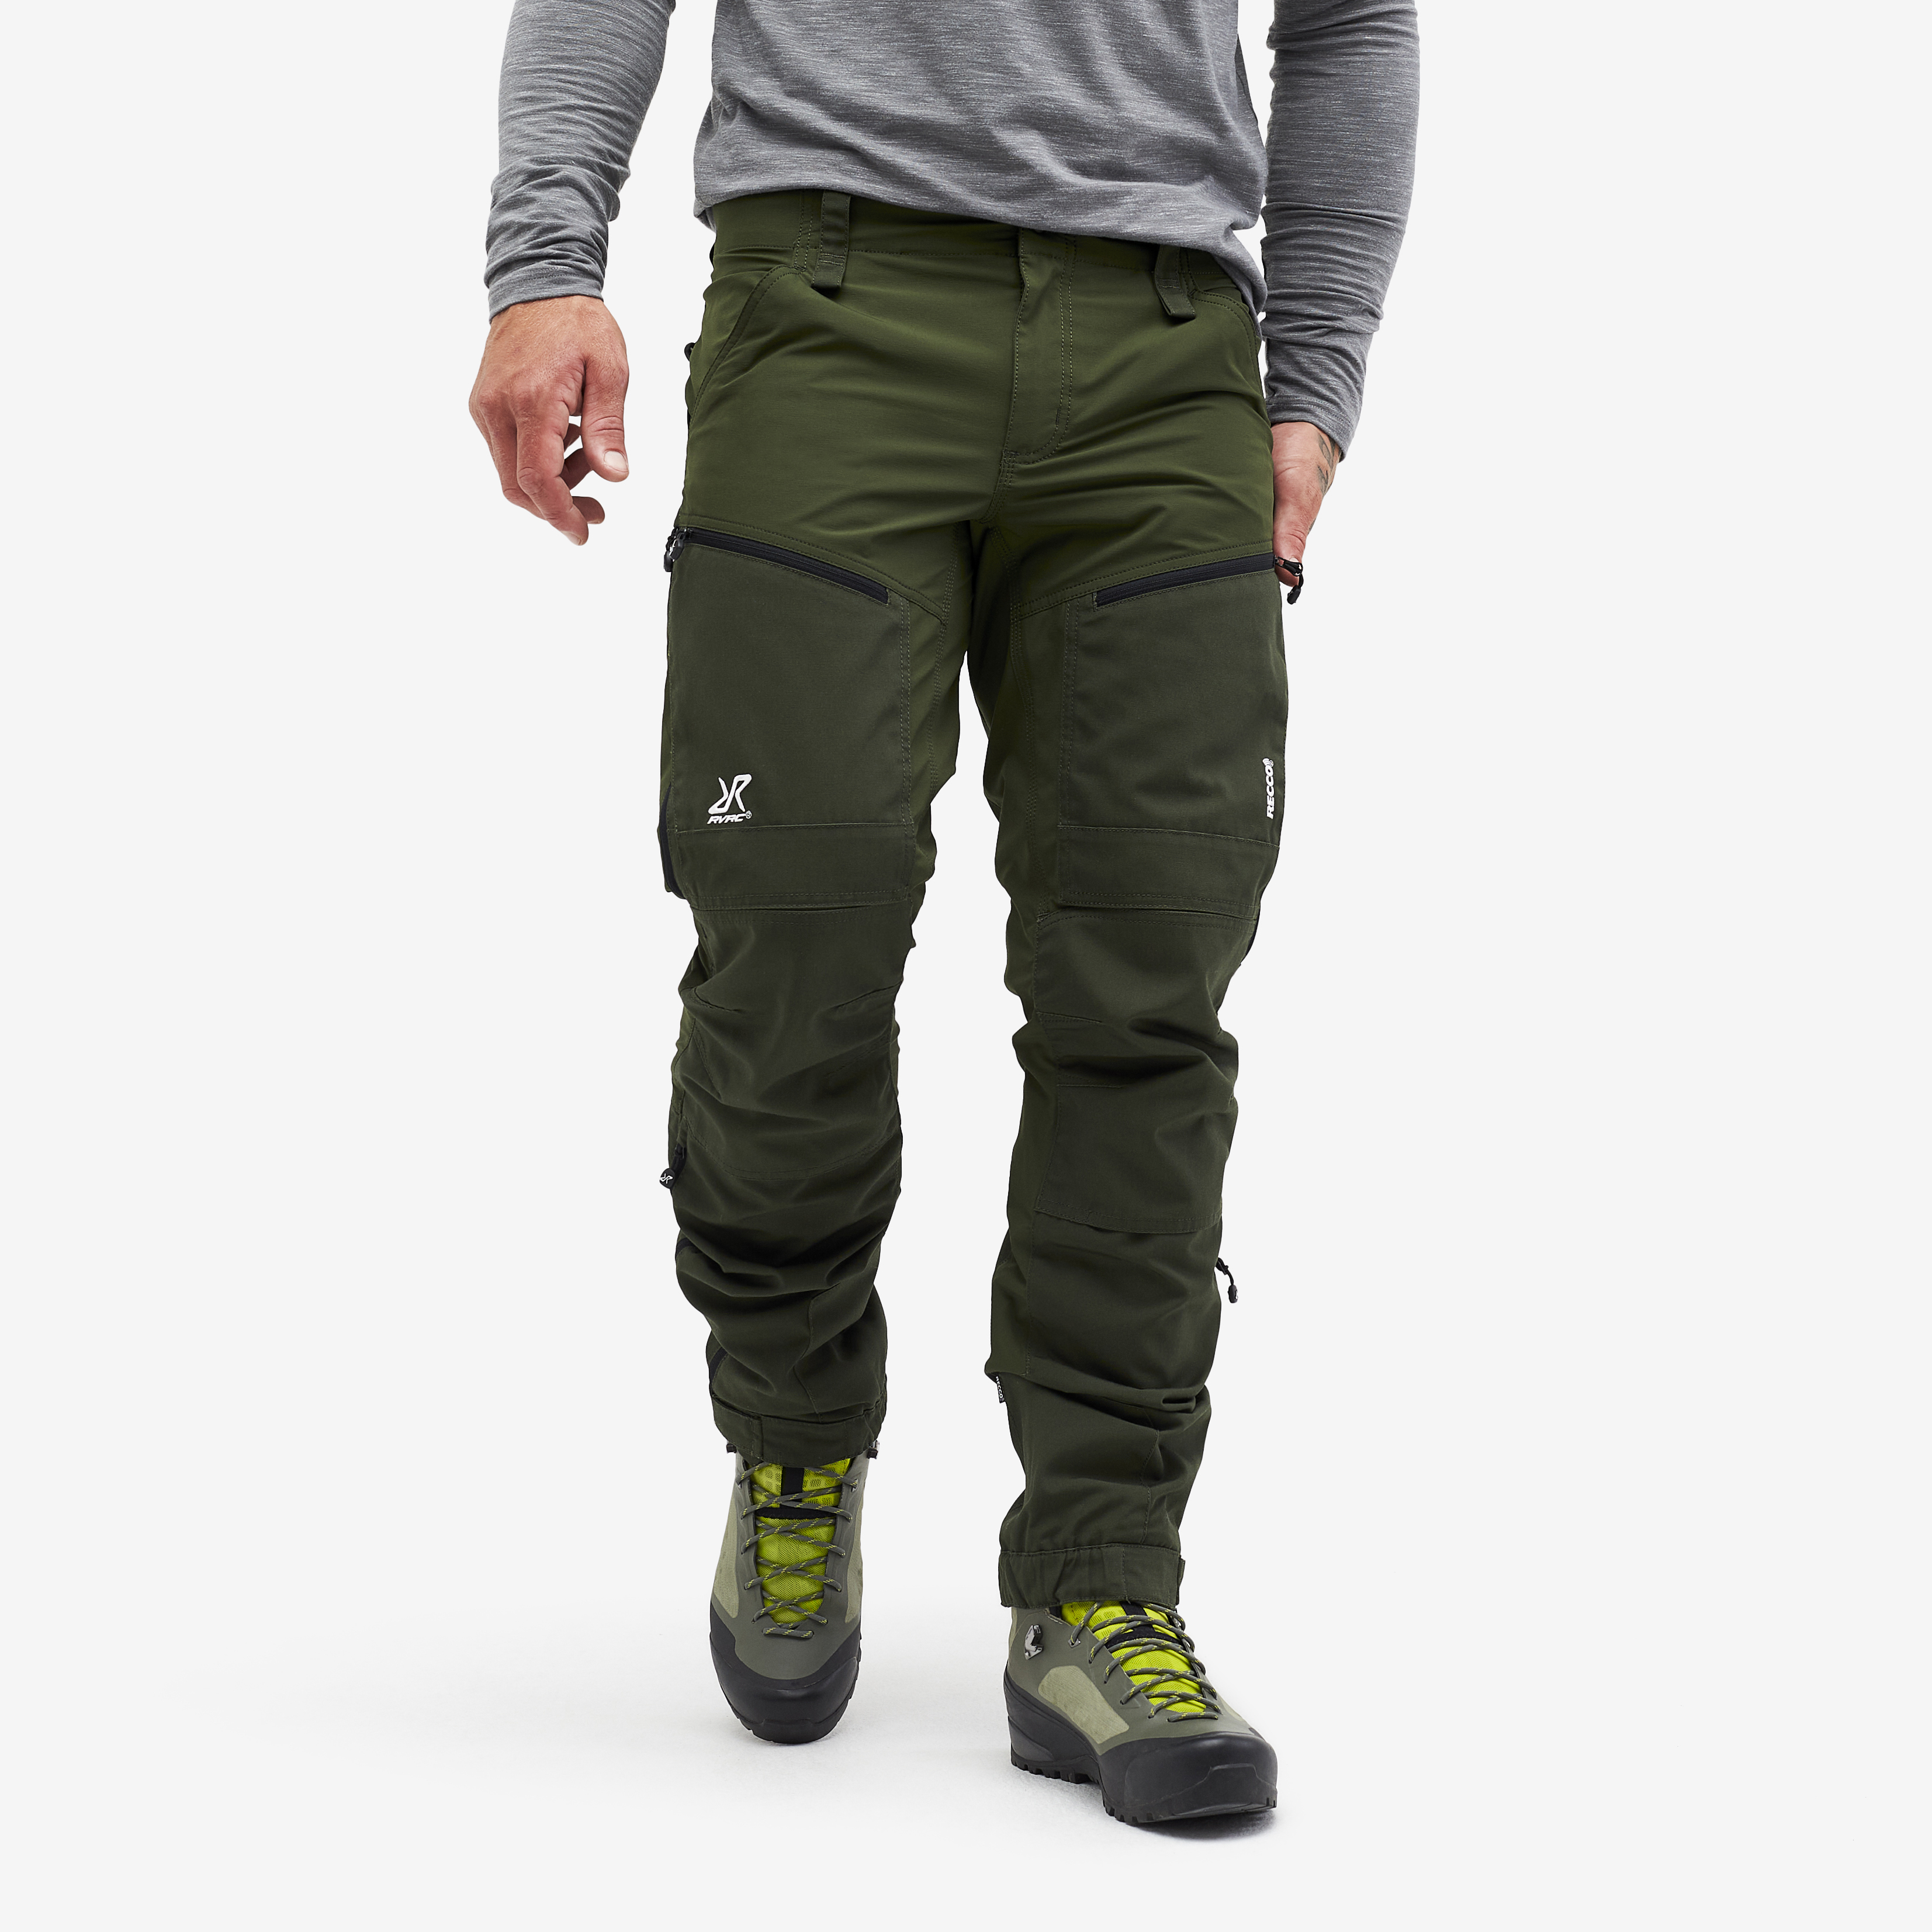 RVRC GP Pro Rescue hiking trousers for men in green